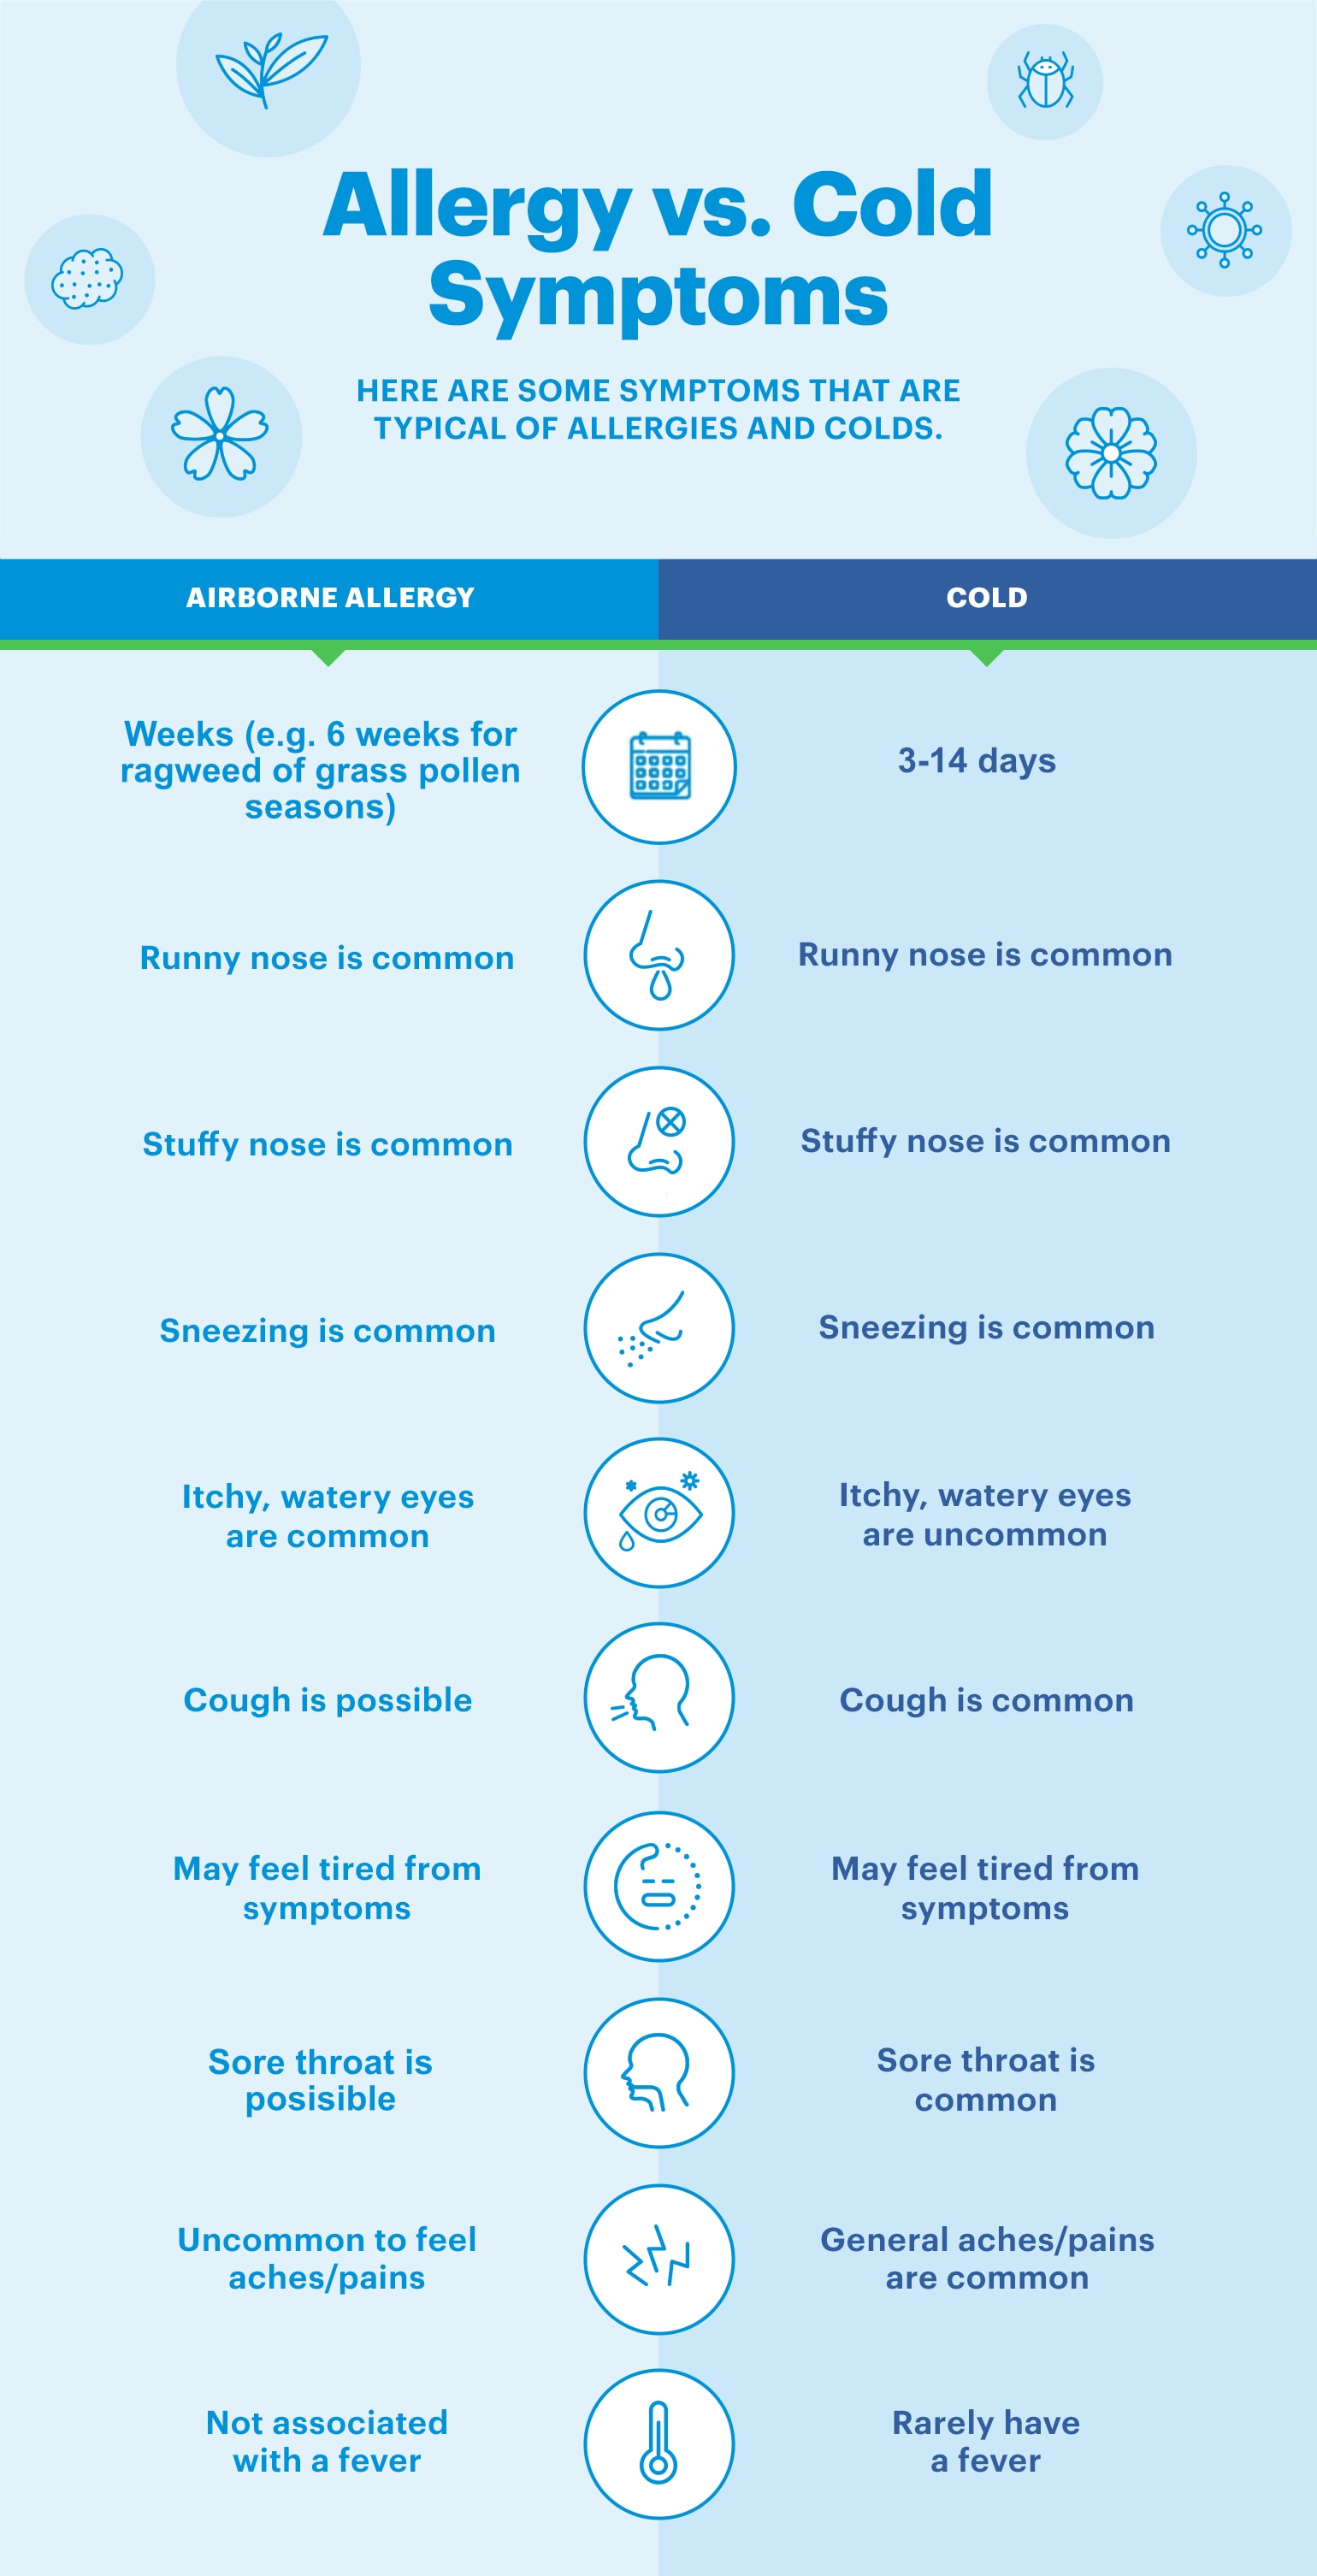 Typical Characteristics of Allergies vs. a Cold